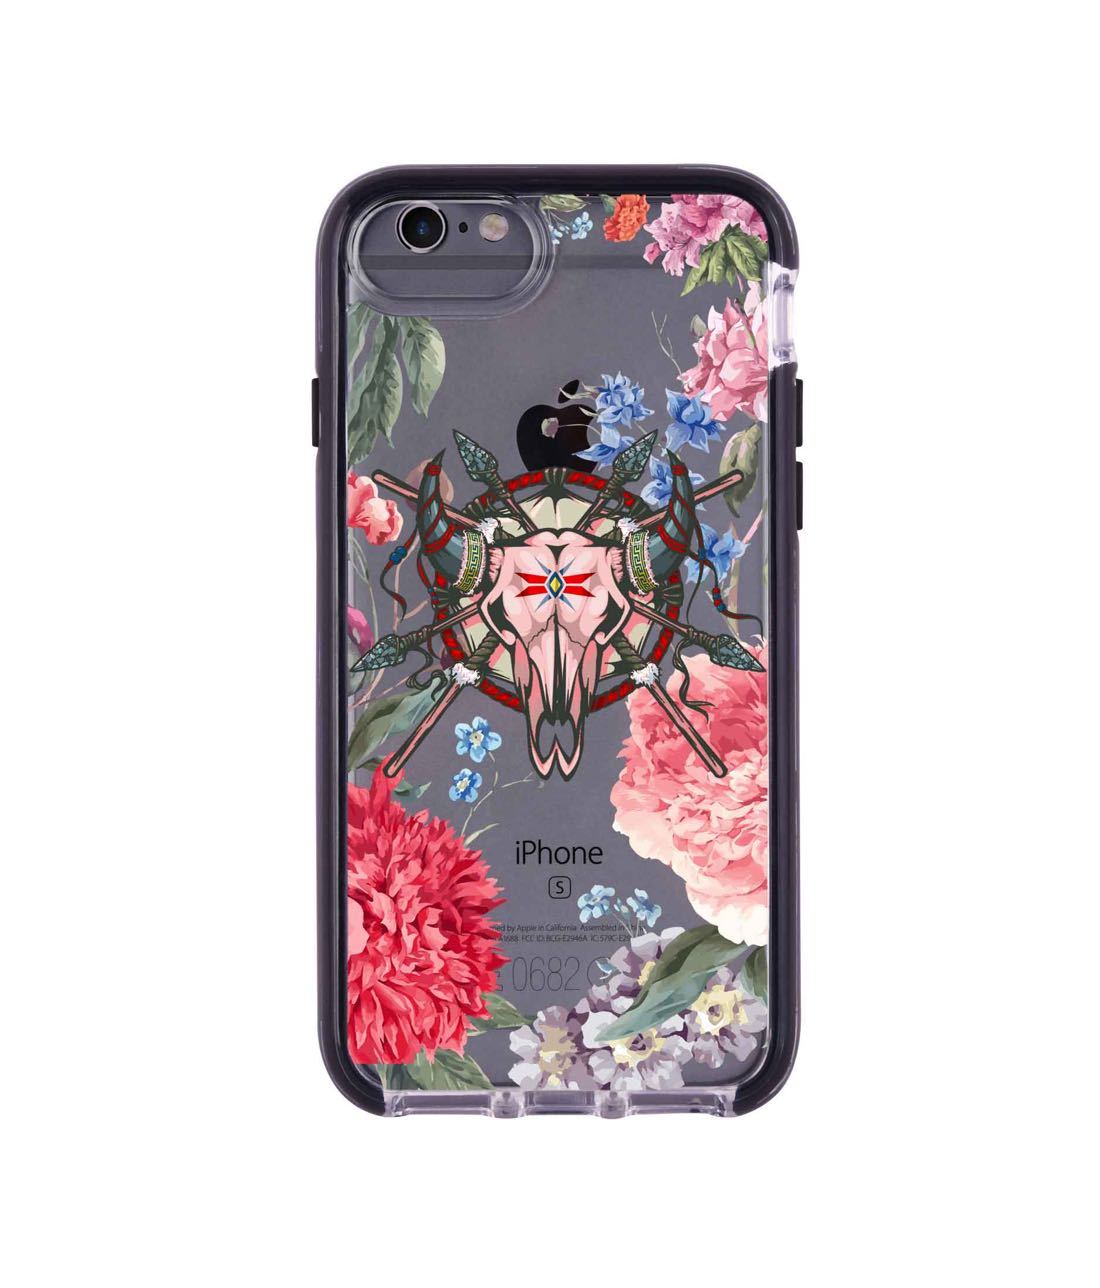 Floral Symmetry - Extreme Phone Case for iPhone 6 Plus